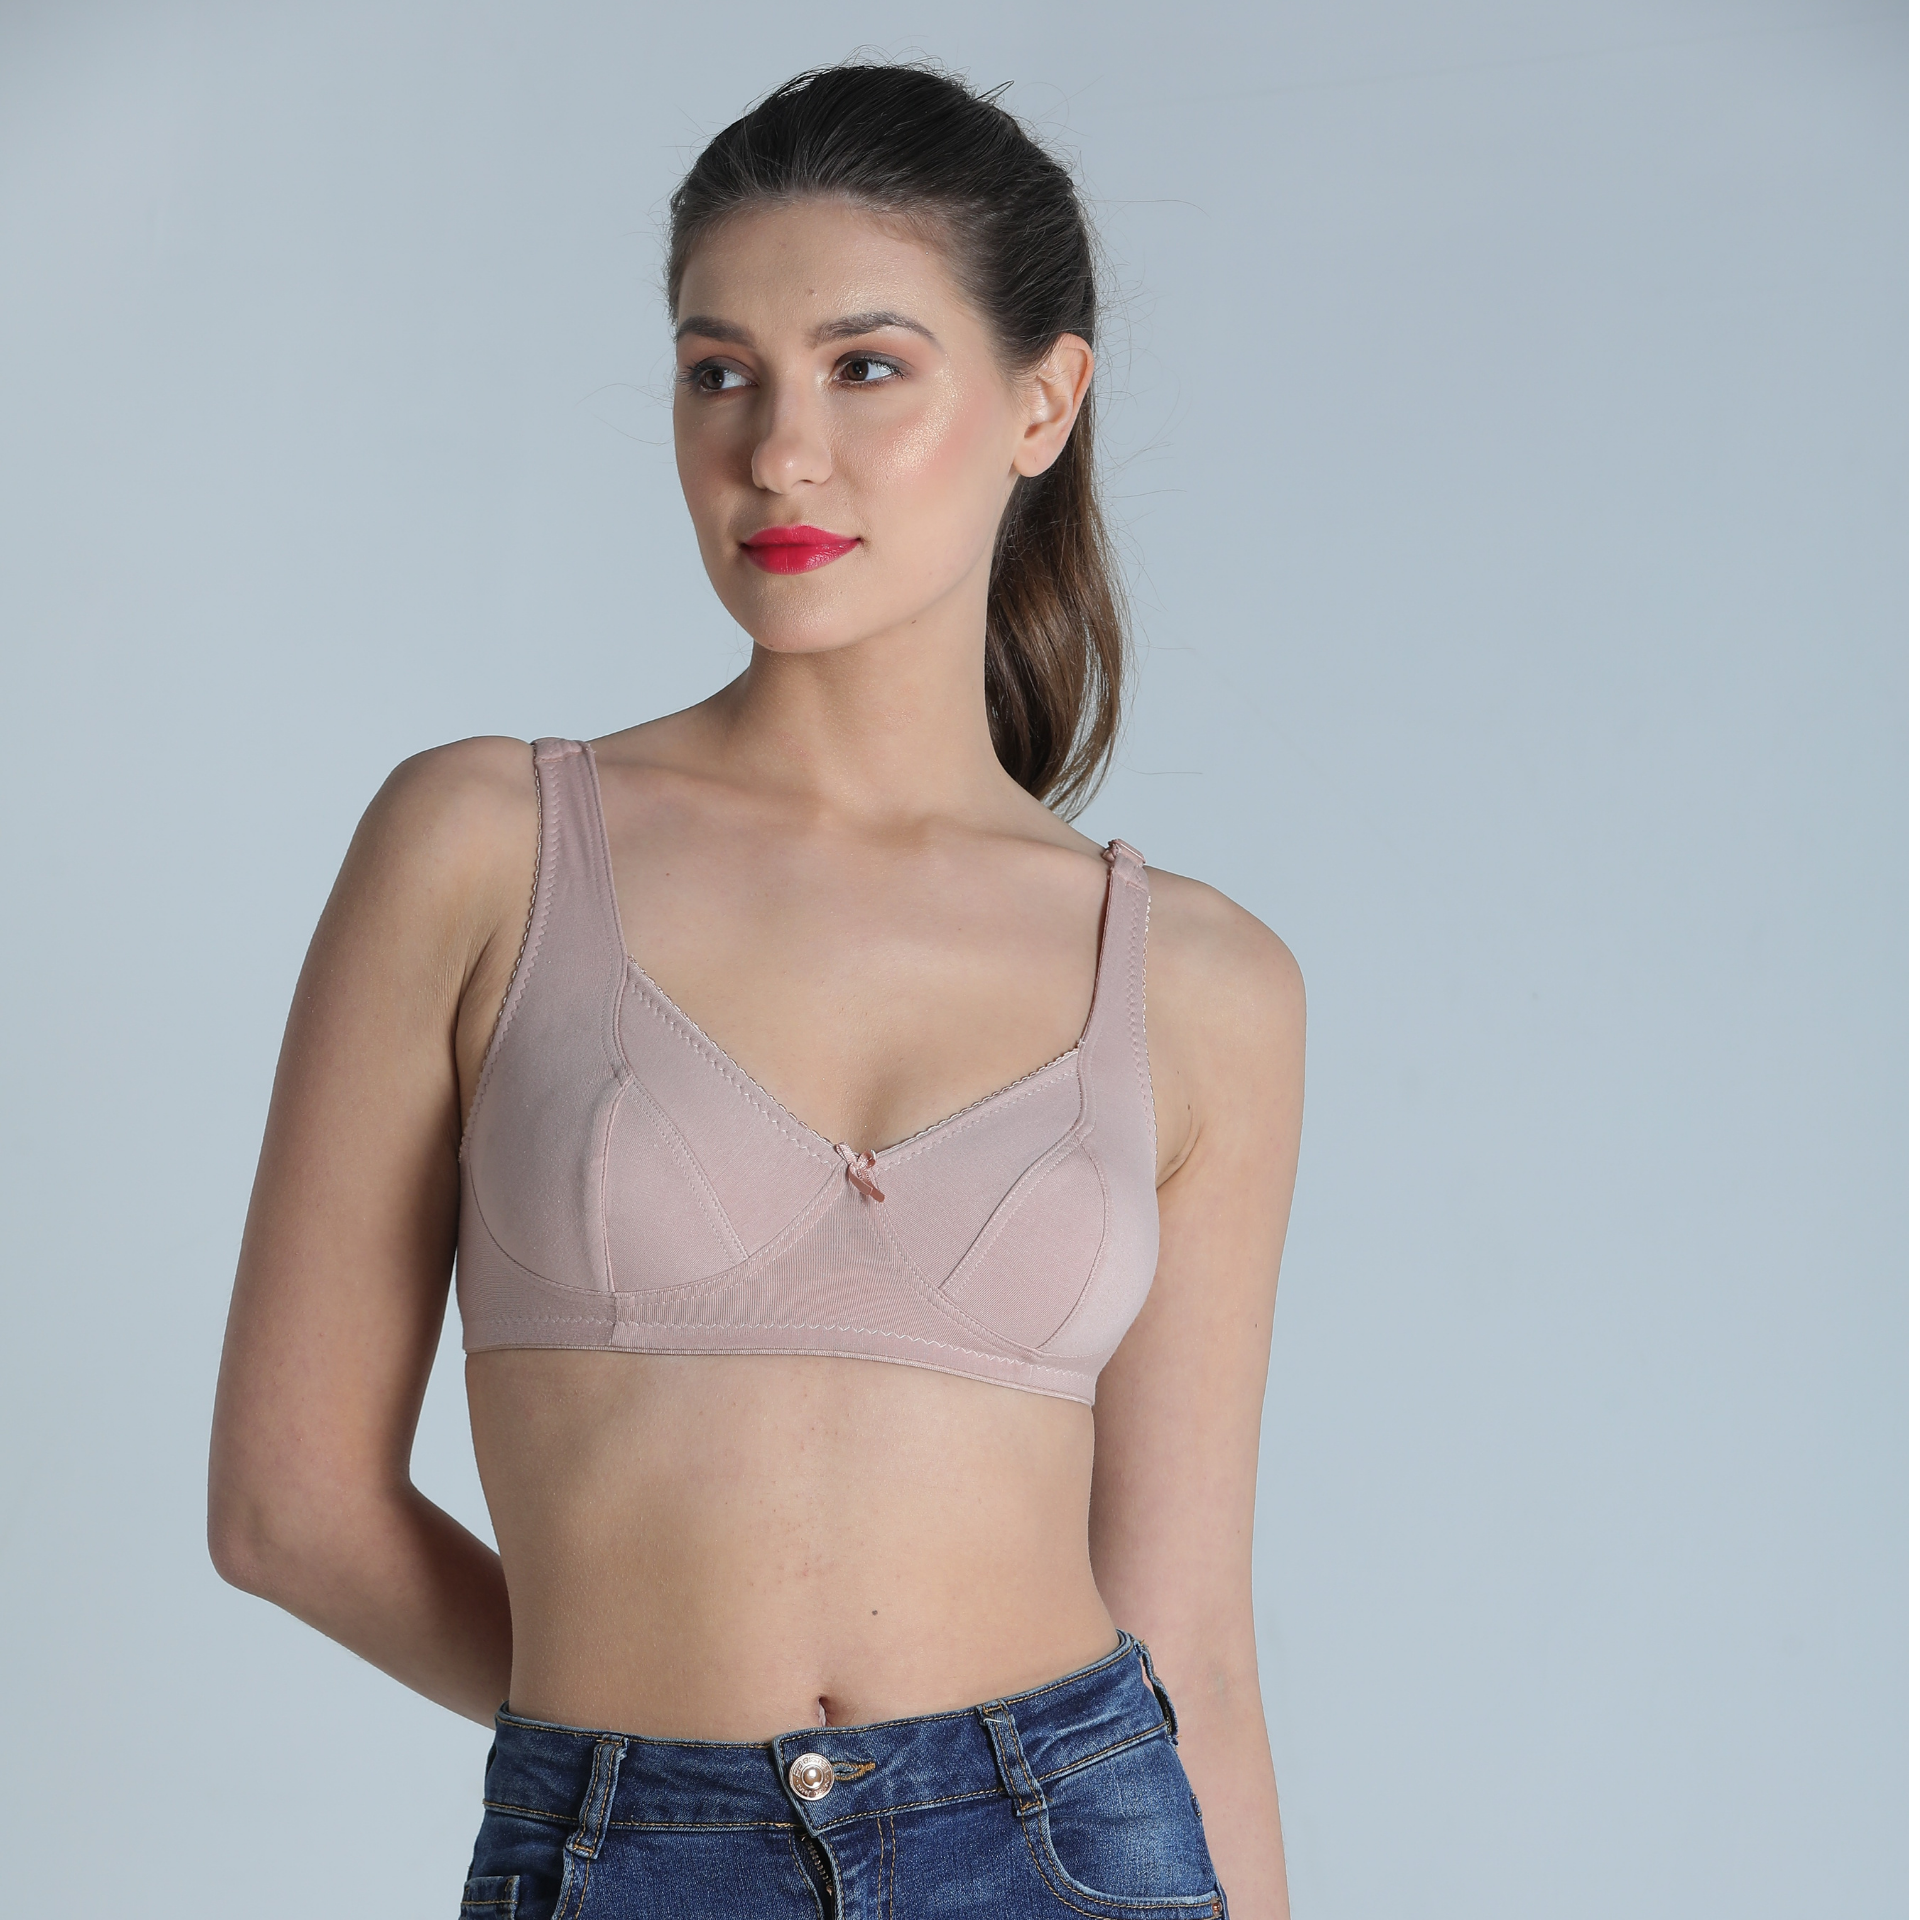 Buy Non-Padded Non Wired Full Figure Bra in Nude - Cotton & Lace